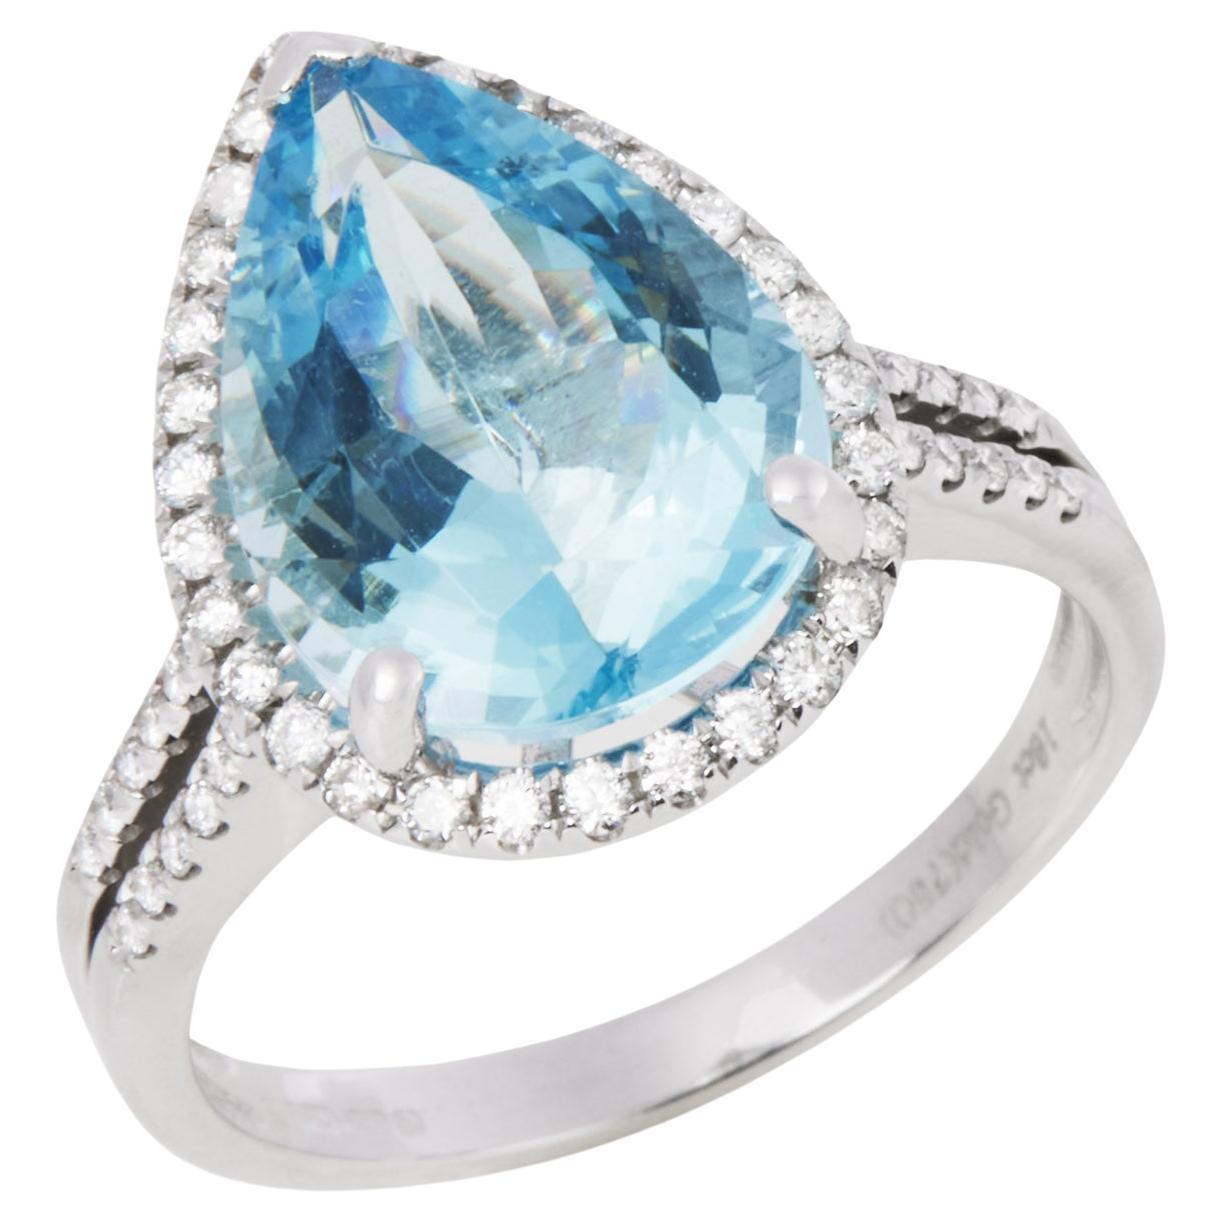 David Jerome Certified 4.77ct Pear Cut Aquamarine and Diamond Ring For Sale